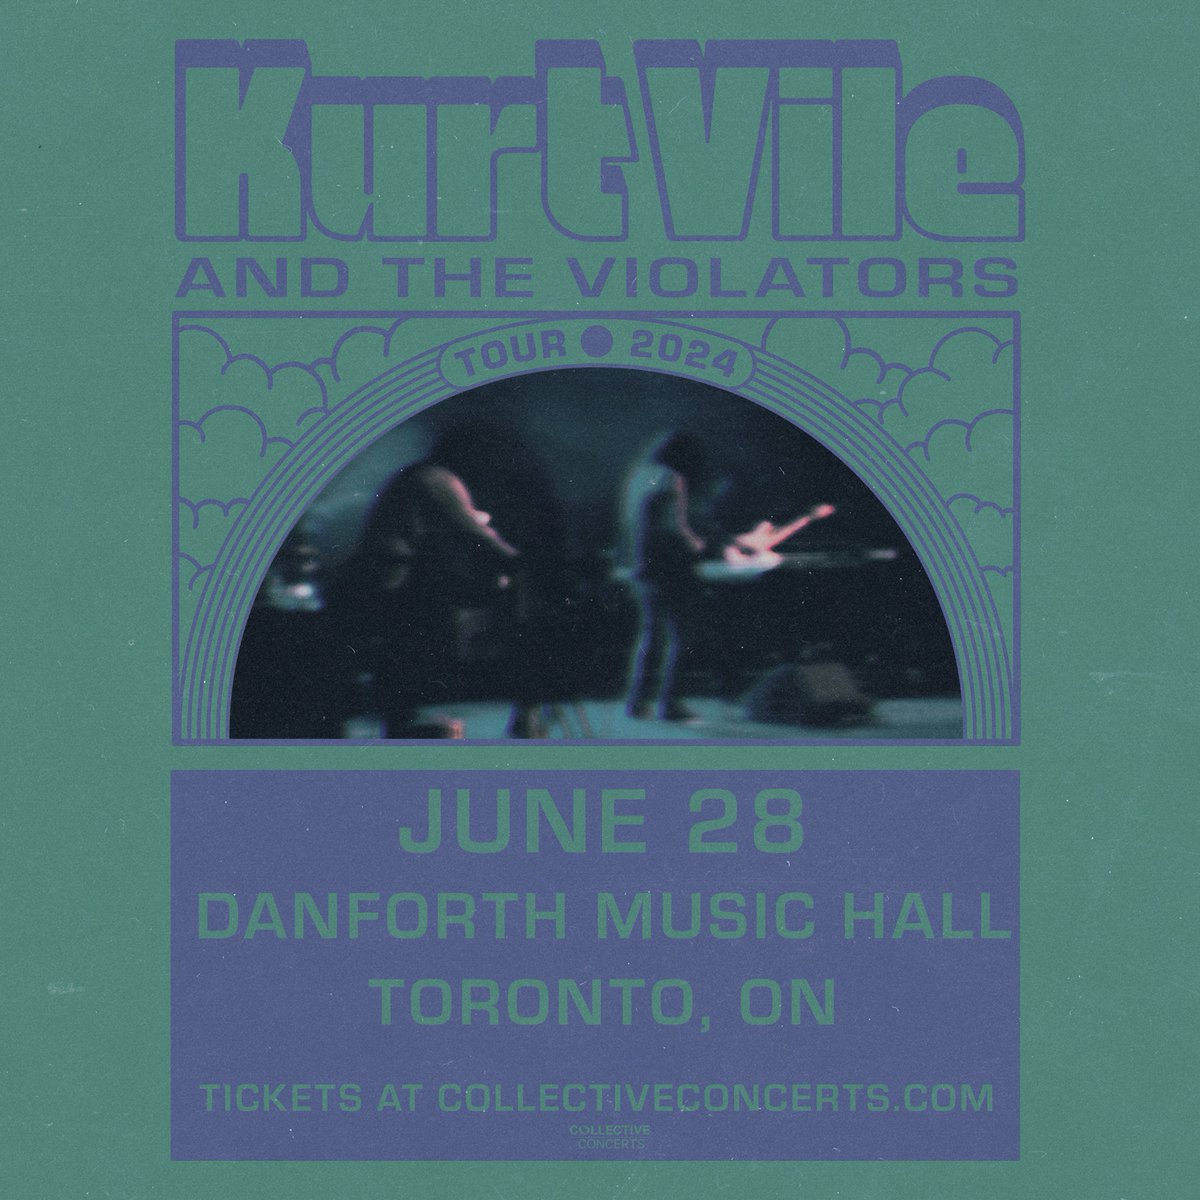 More tickets have been released for the Kurt Vile and the Violators show at @TheDanforthMH this June! Tickets here: collectiveconcerts.com/event/kurt-vil…